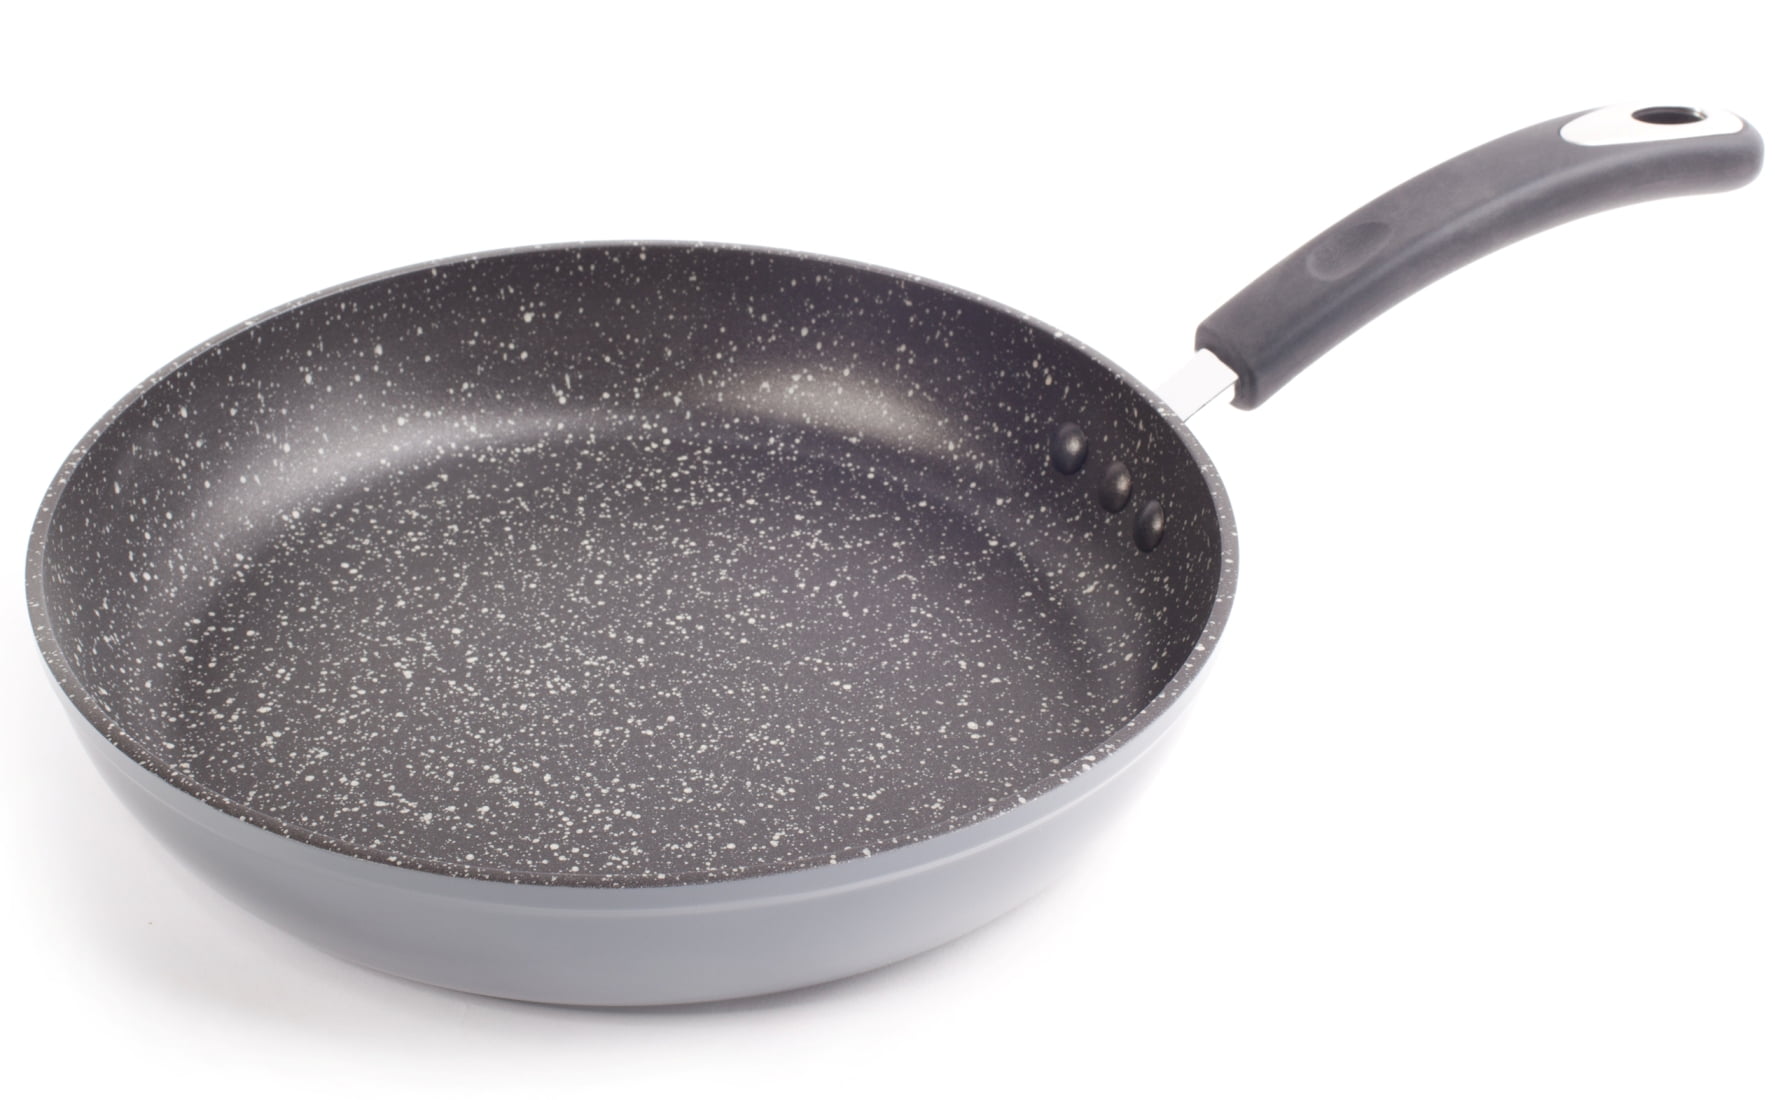  12 Stone Frying Pan by Ozeri, with 100% APEO & PFOA-Free Stone-Derived  Non-Stick Coating from Germany